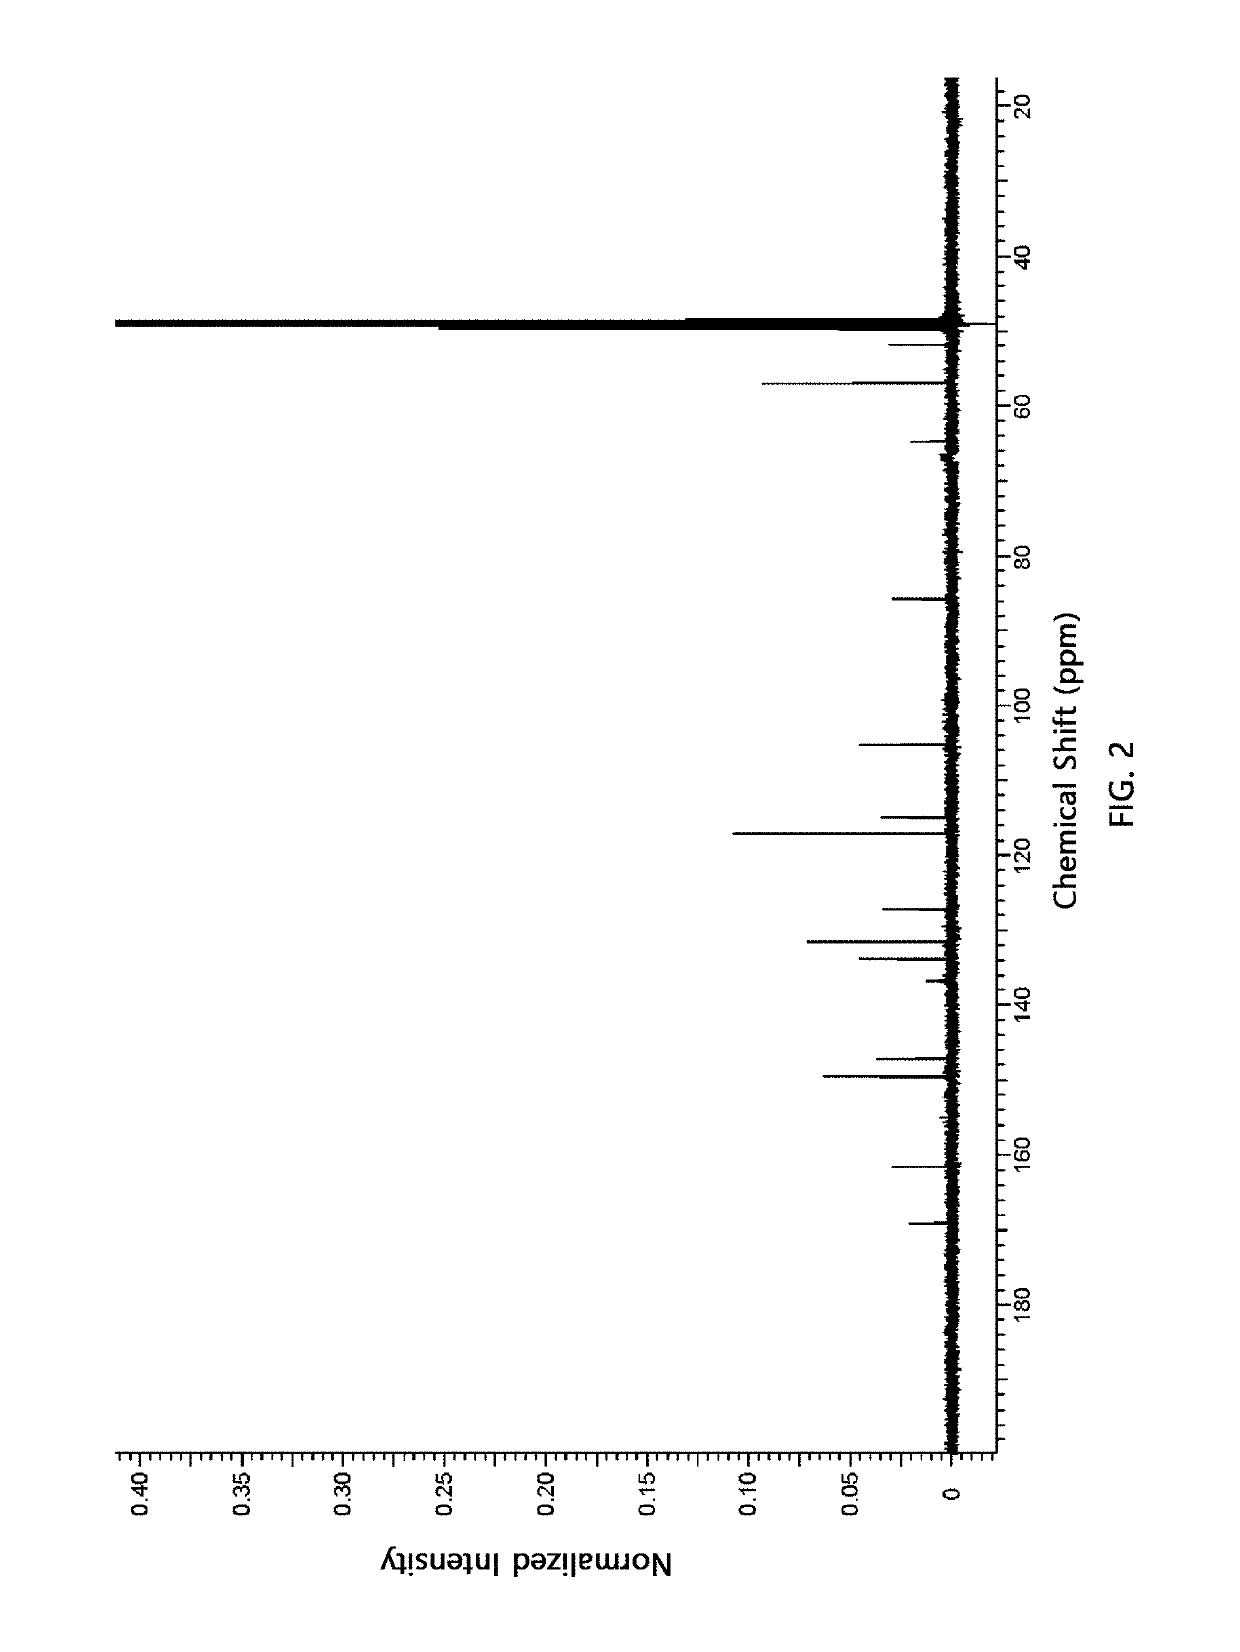 Novel compound promoting osteoblast differentiation and inhibiting adipocyte differentiation, preparation method thereof and application thereof